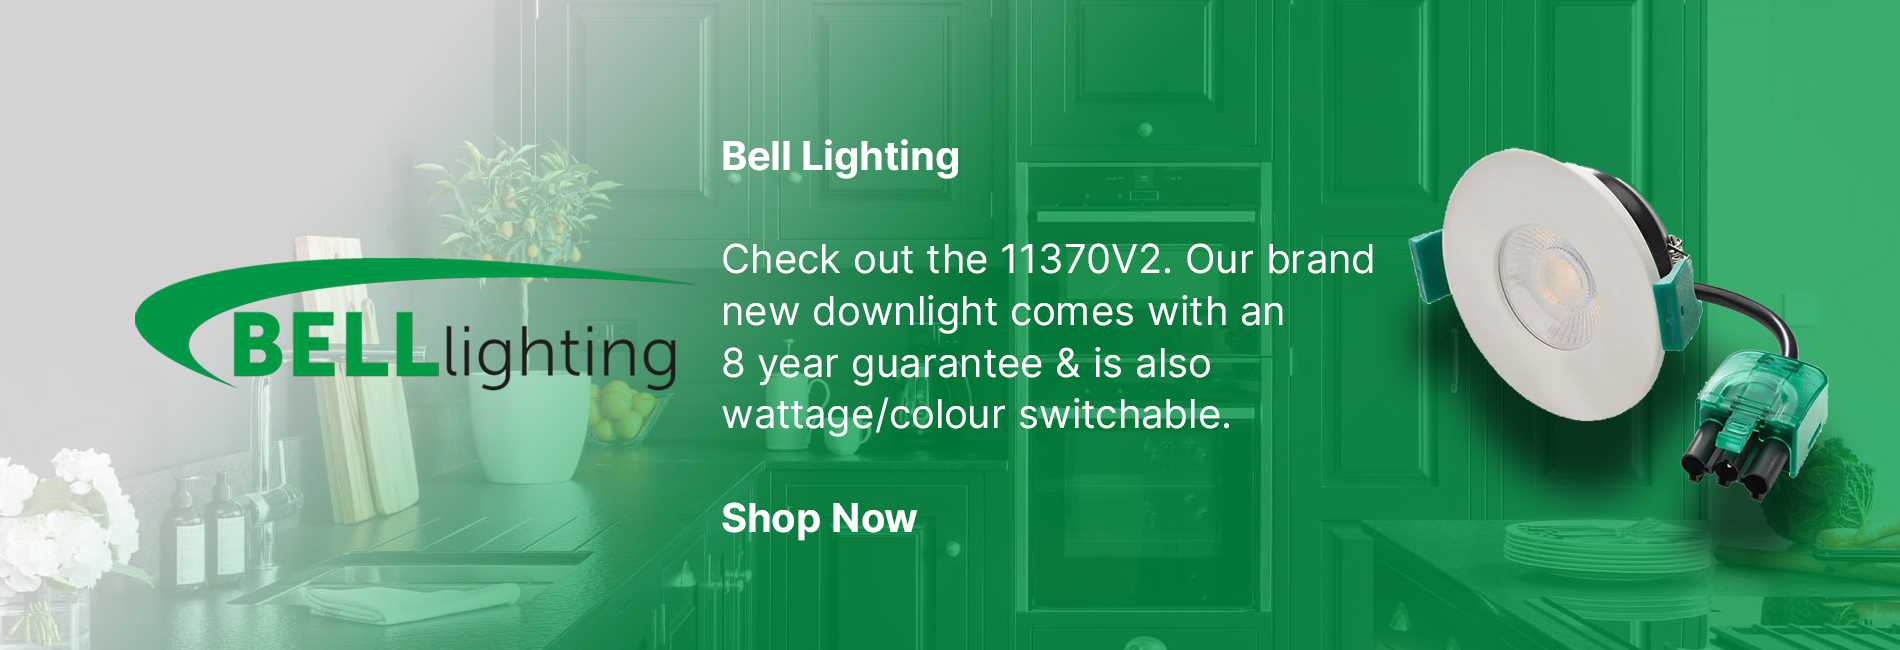 Bell Lighting - We are proud to launch our latest additions to our popular and reliable Firestay Downlight range!